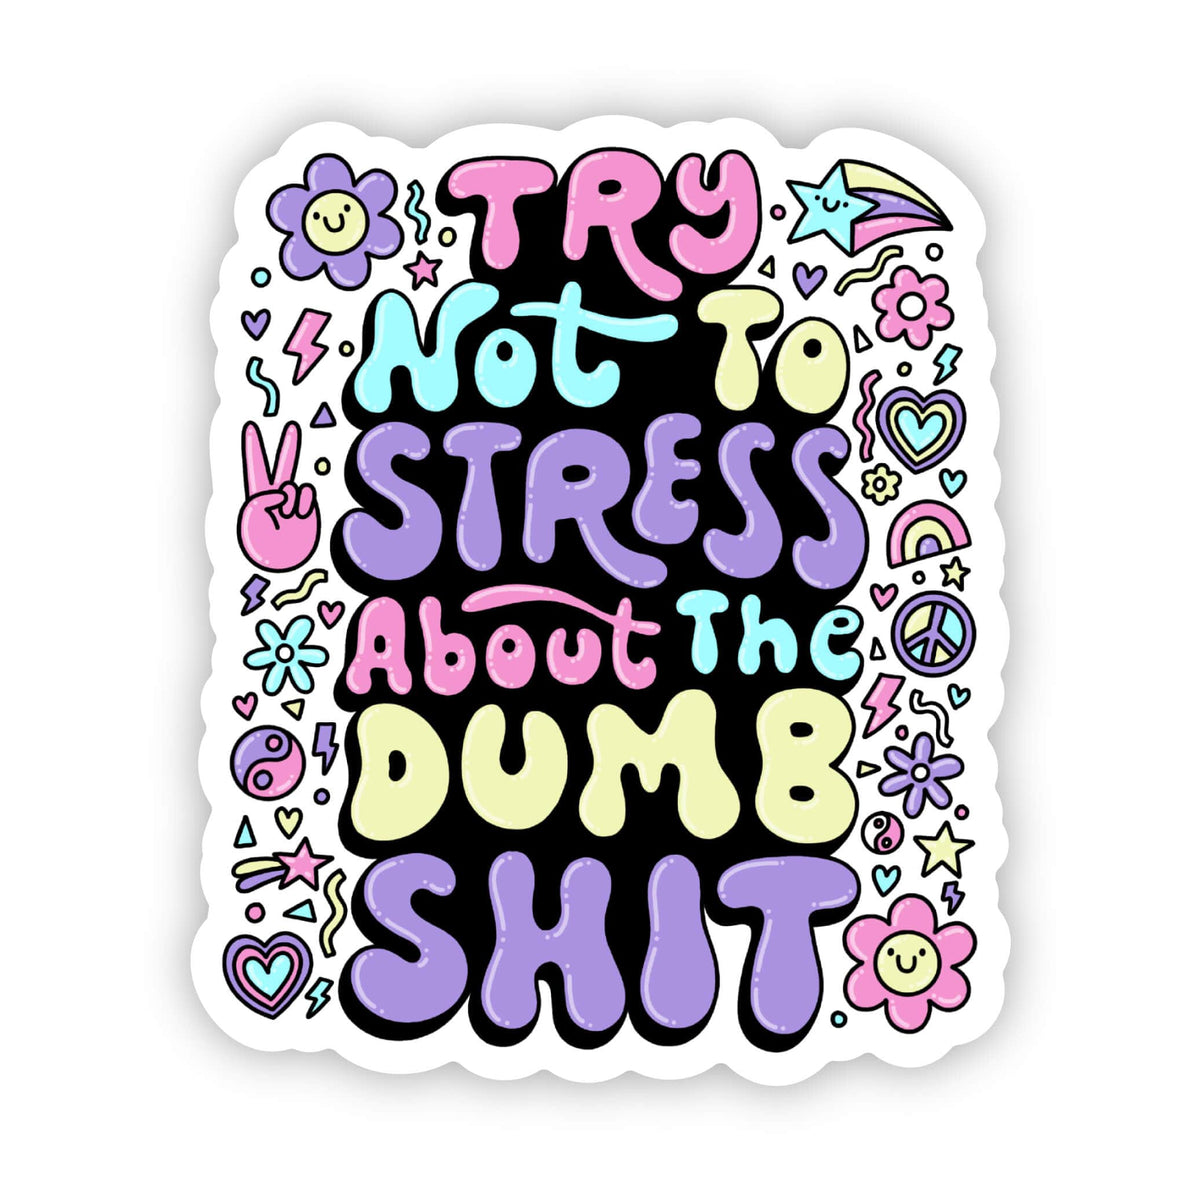 &quot;Try not to stress about the dumb shit&quot; sticker